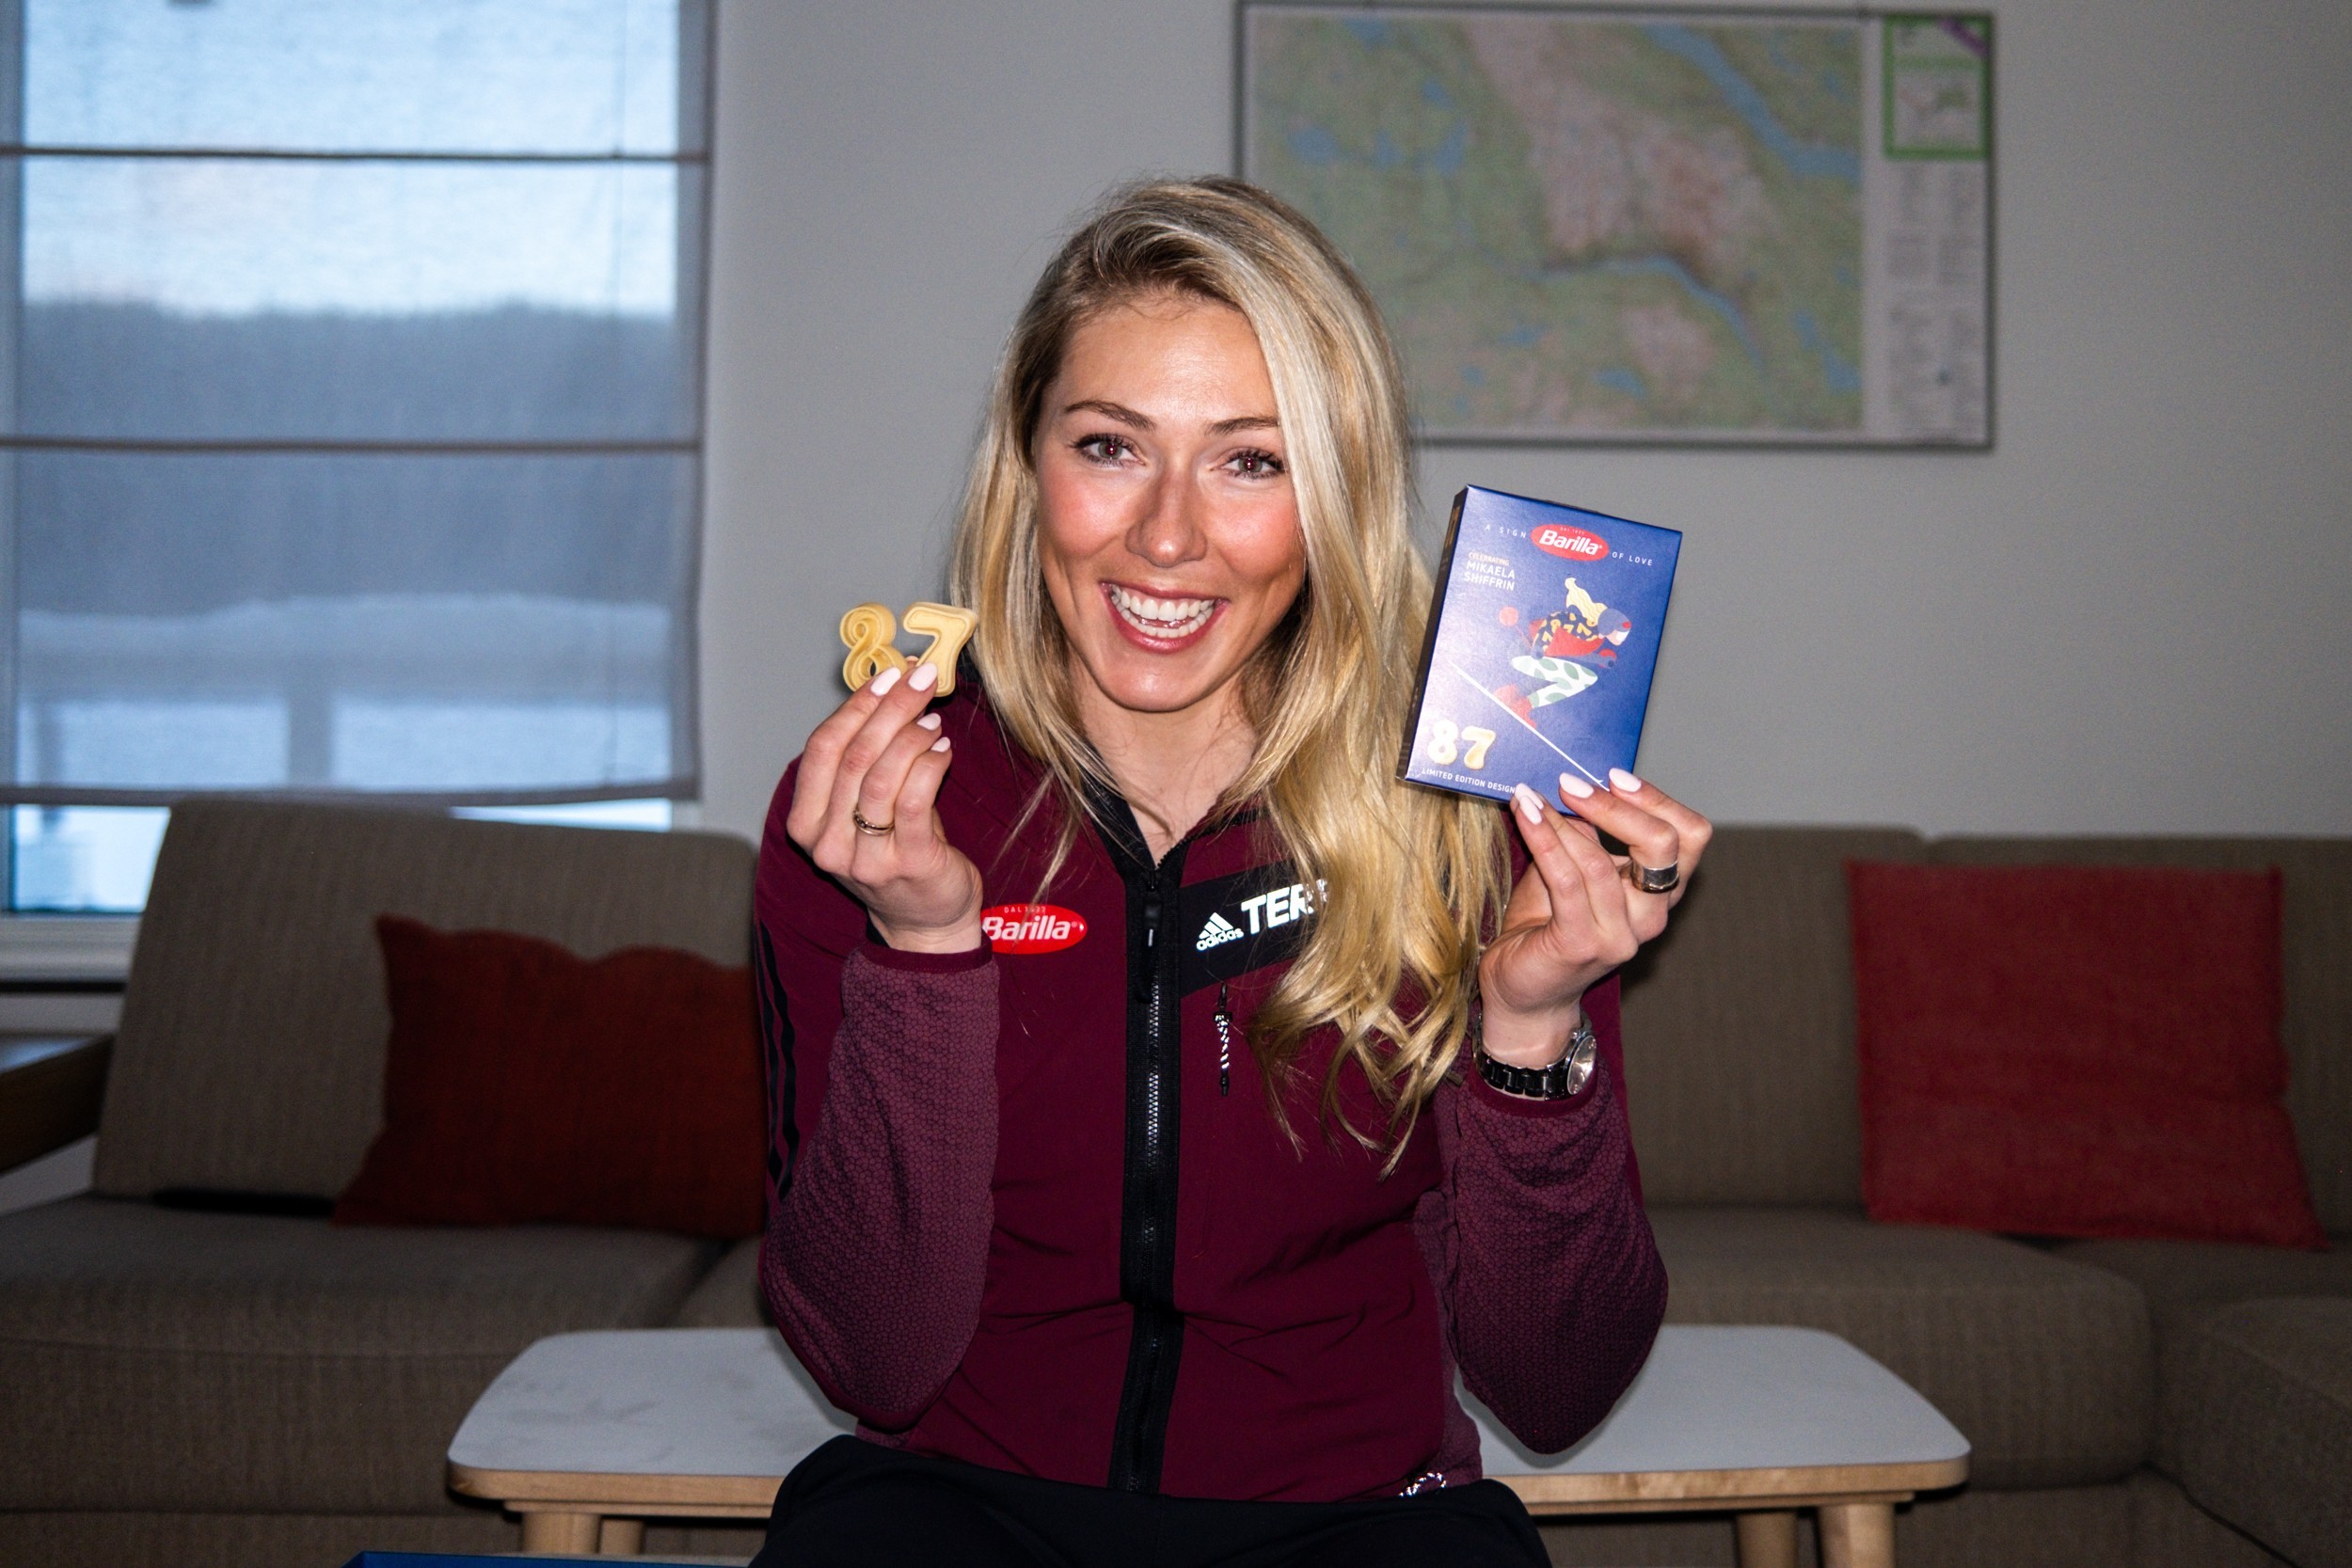 Barilla & Mikaela Shiffrin: Greatness starts with a great recipe - Pack No. 38